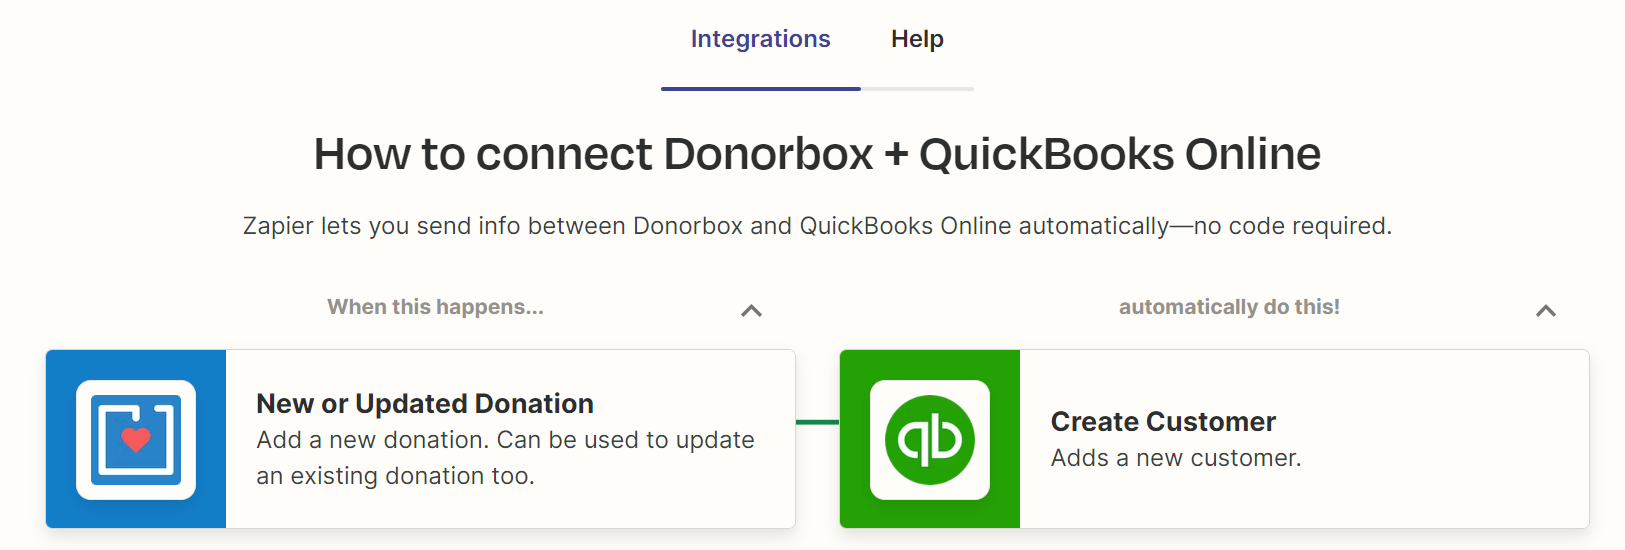 Quickbooks and donorbox integration